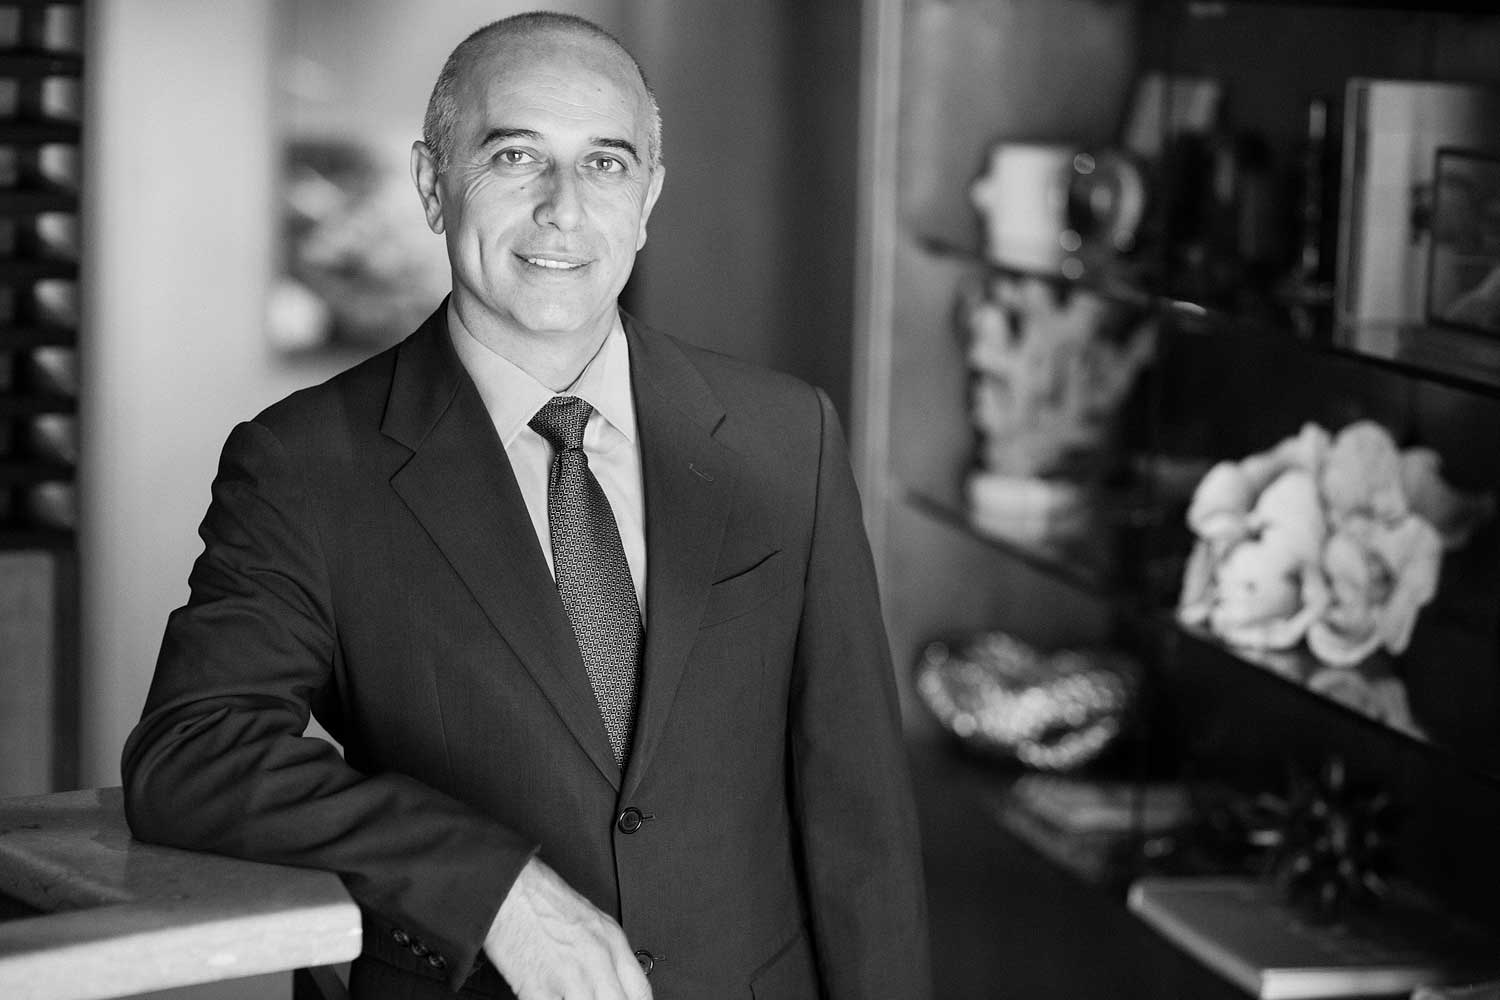 Portrait of Donato Poto, Co-owner and General Manager